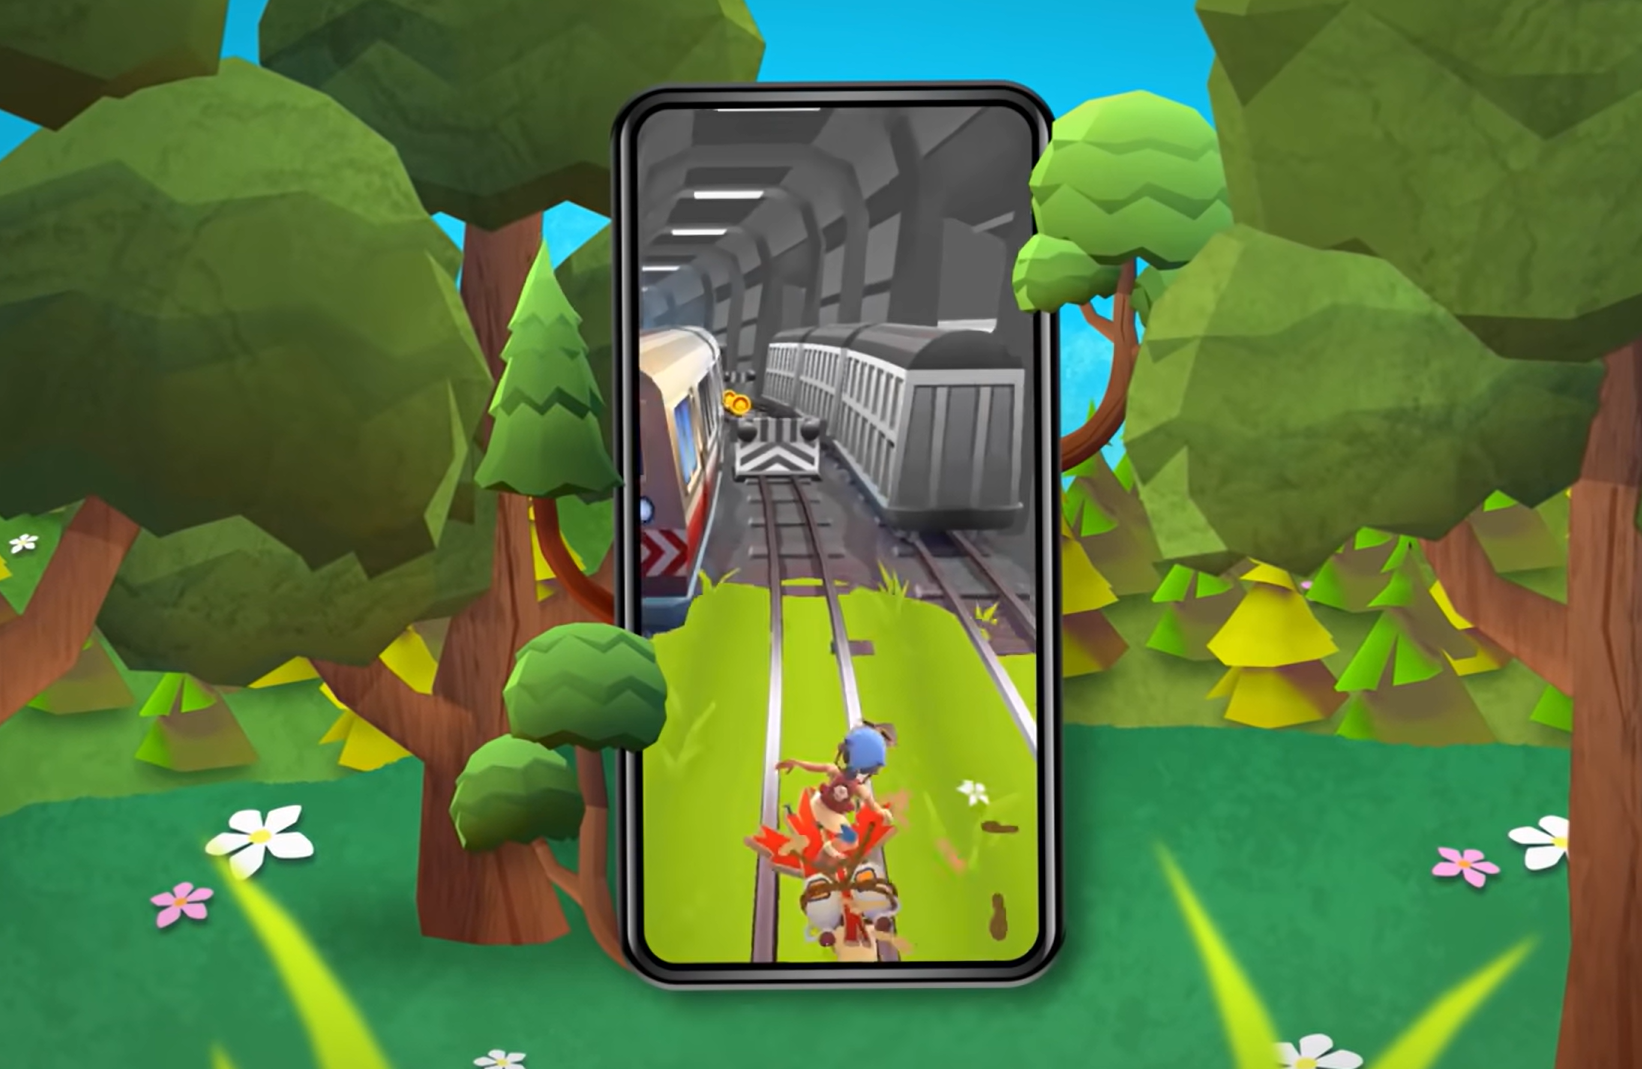 Subway Surfers - Subway Surfers added a new photo.